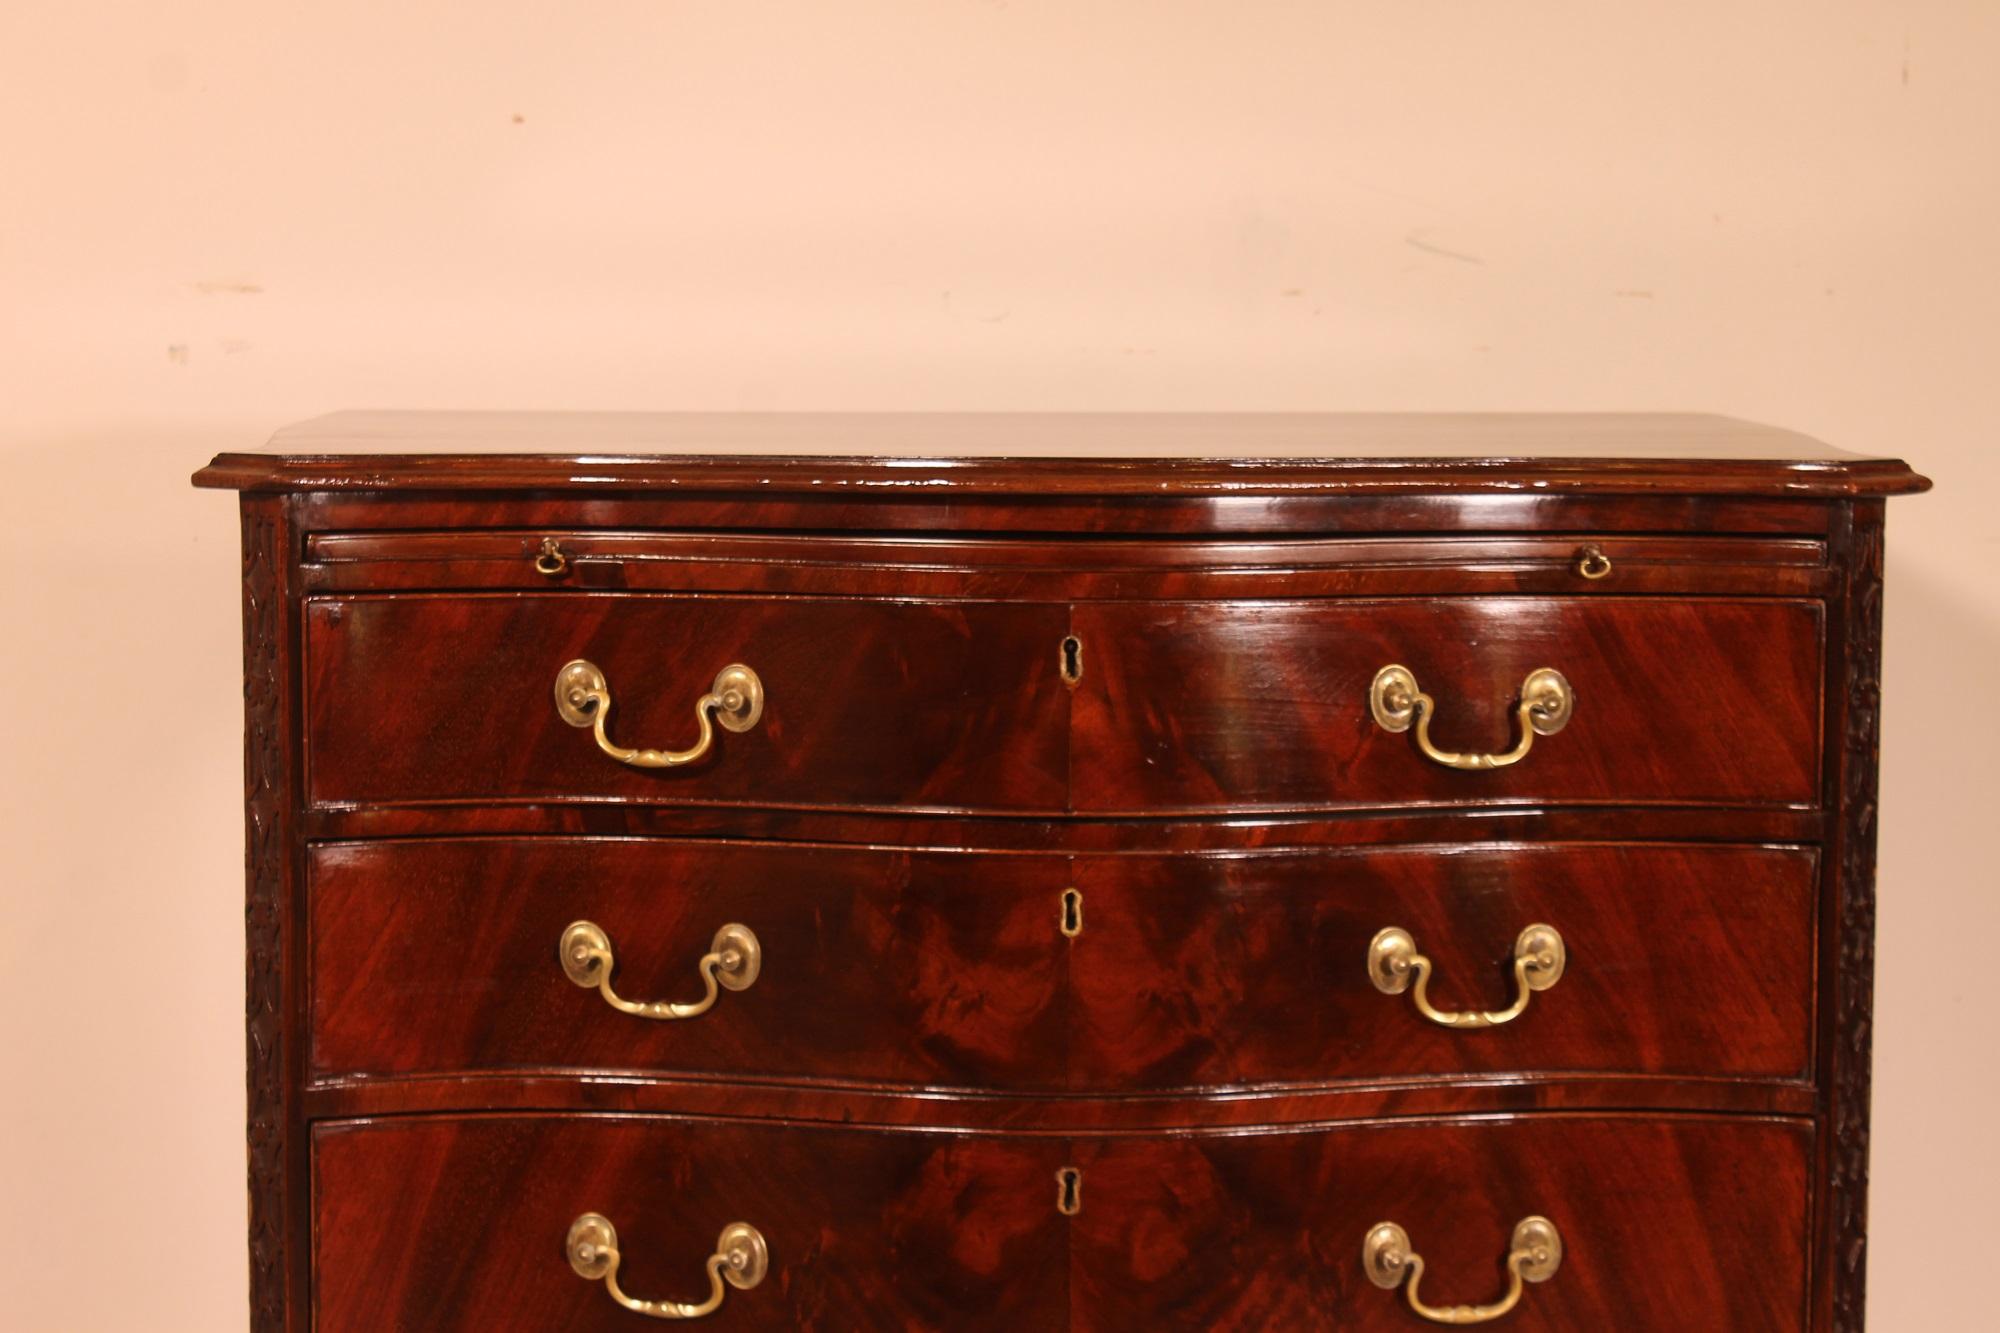 Beautiful small English serpentine chest of drawers from the end of the 18th century in mahogany

A fine chest of drawers of curved shape of small size which has a zipper which at the time served as a small writing desk

The chest of drawers is